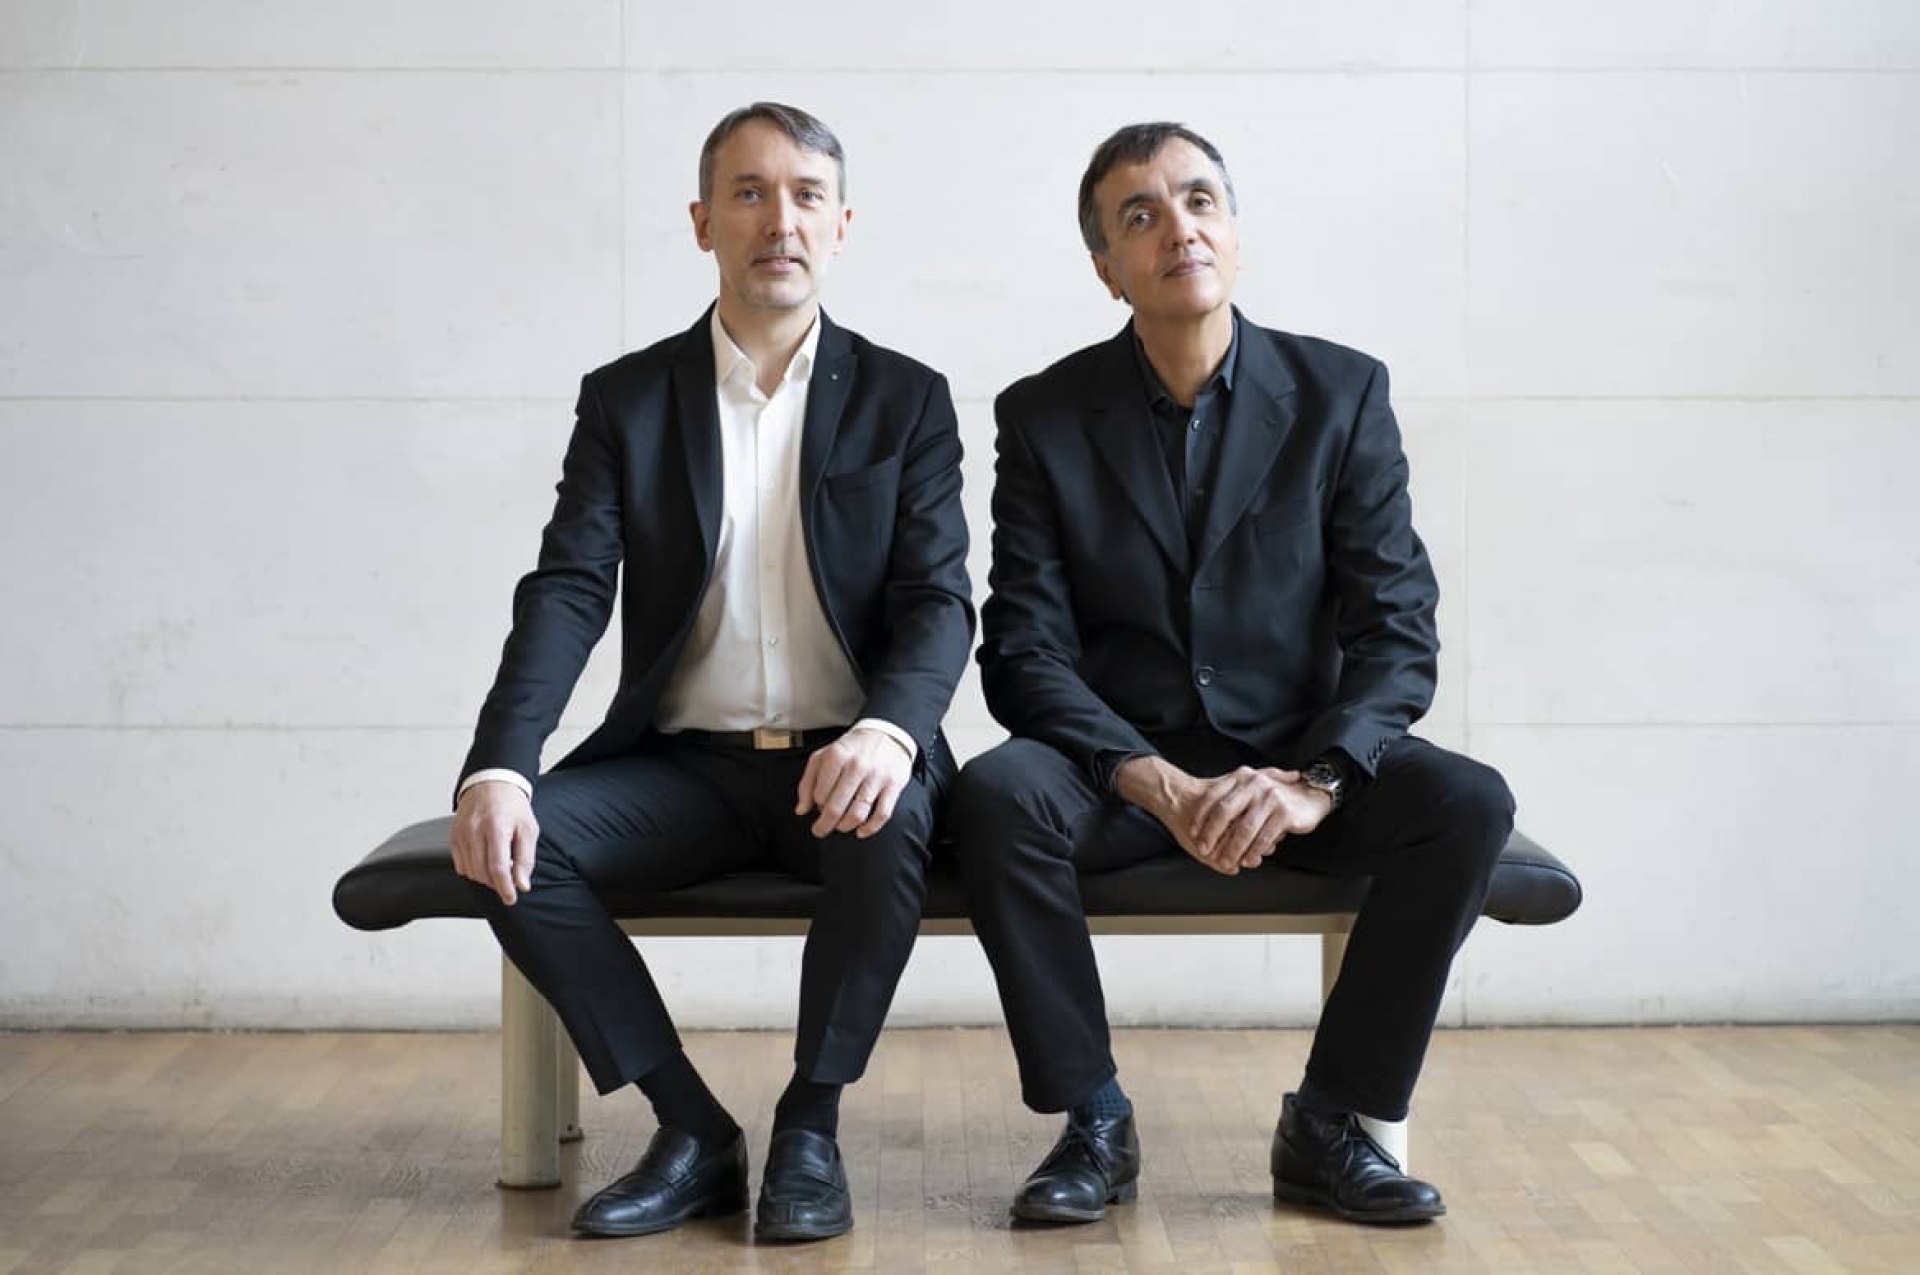 Prague Symphony Orchestra, Éric le Sage & Olivier Latry, masters of keyboard